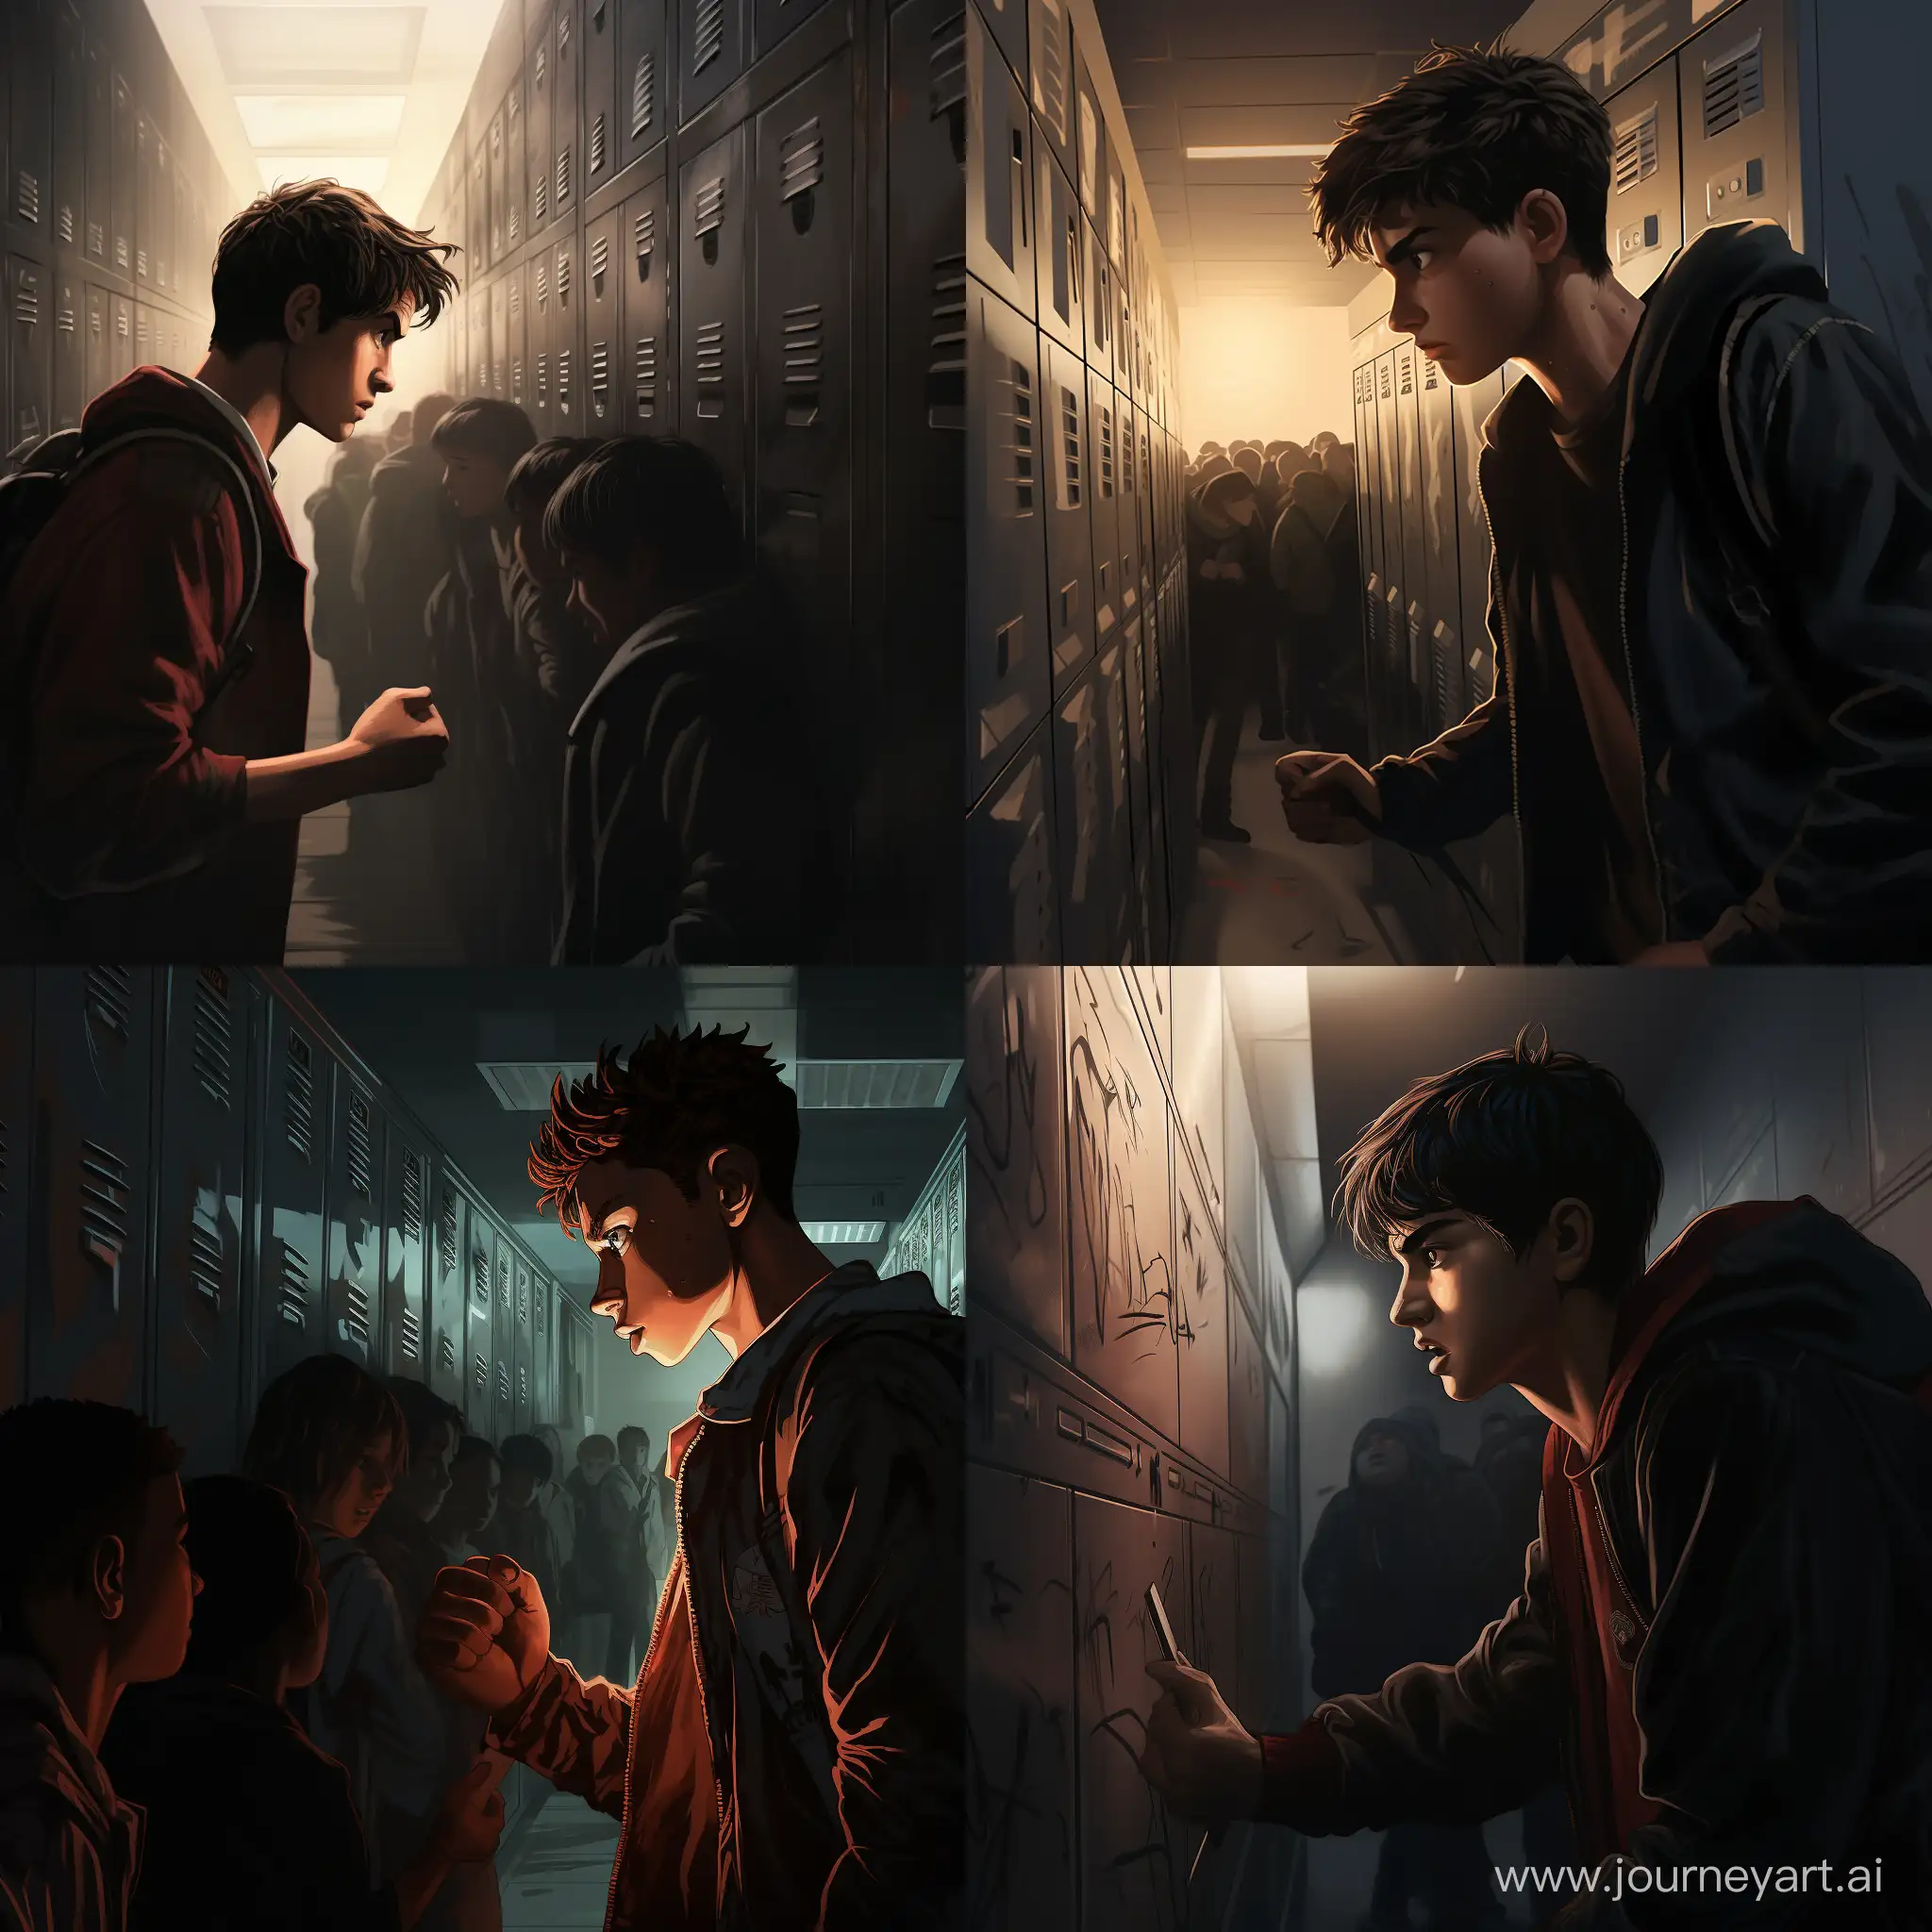 In a dimly lit school hallway, student looms over a smaller peer, forcefully pressing them against a row of lockers. The bully's raised fist and threatening to hit. Frame the scene from a side view, slightly behind the confrontation, Use lighting and composition to heighten the drama and tension in the atmosphere. there is only 2 of them